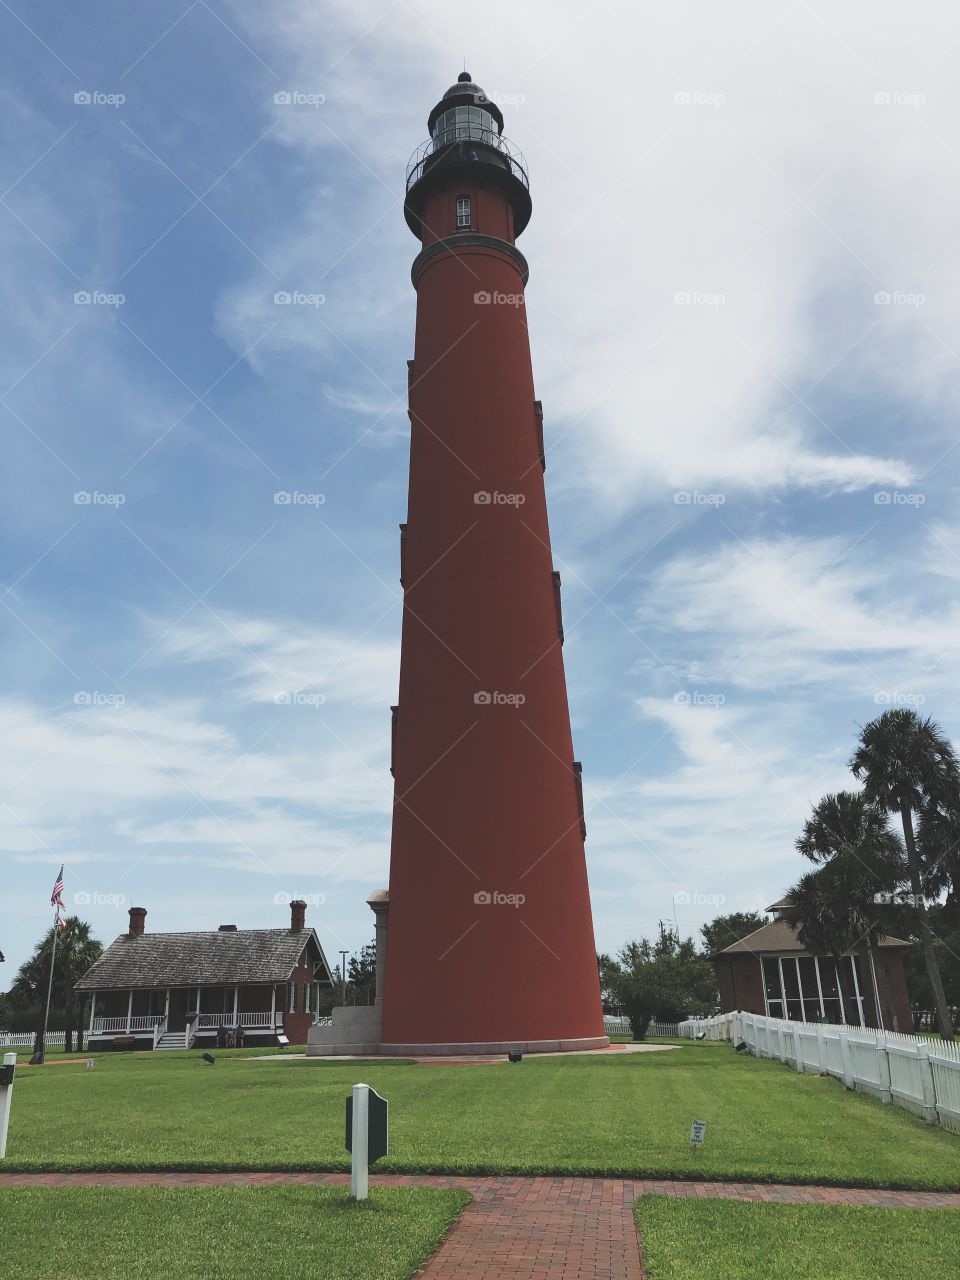 Exploring the scenery at the Ponce de Leon Lighthouse in Daytona Beach, Florida where history comes to life! 